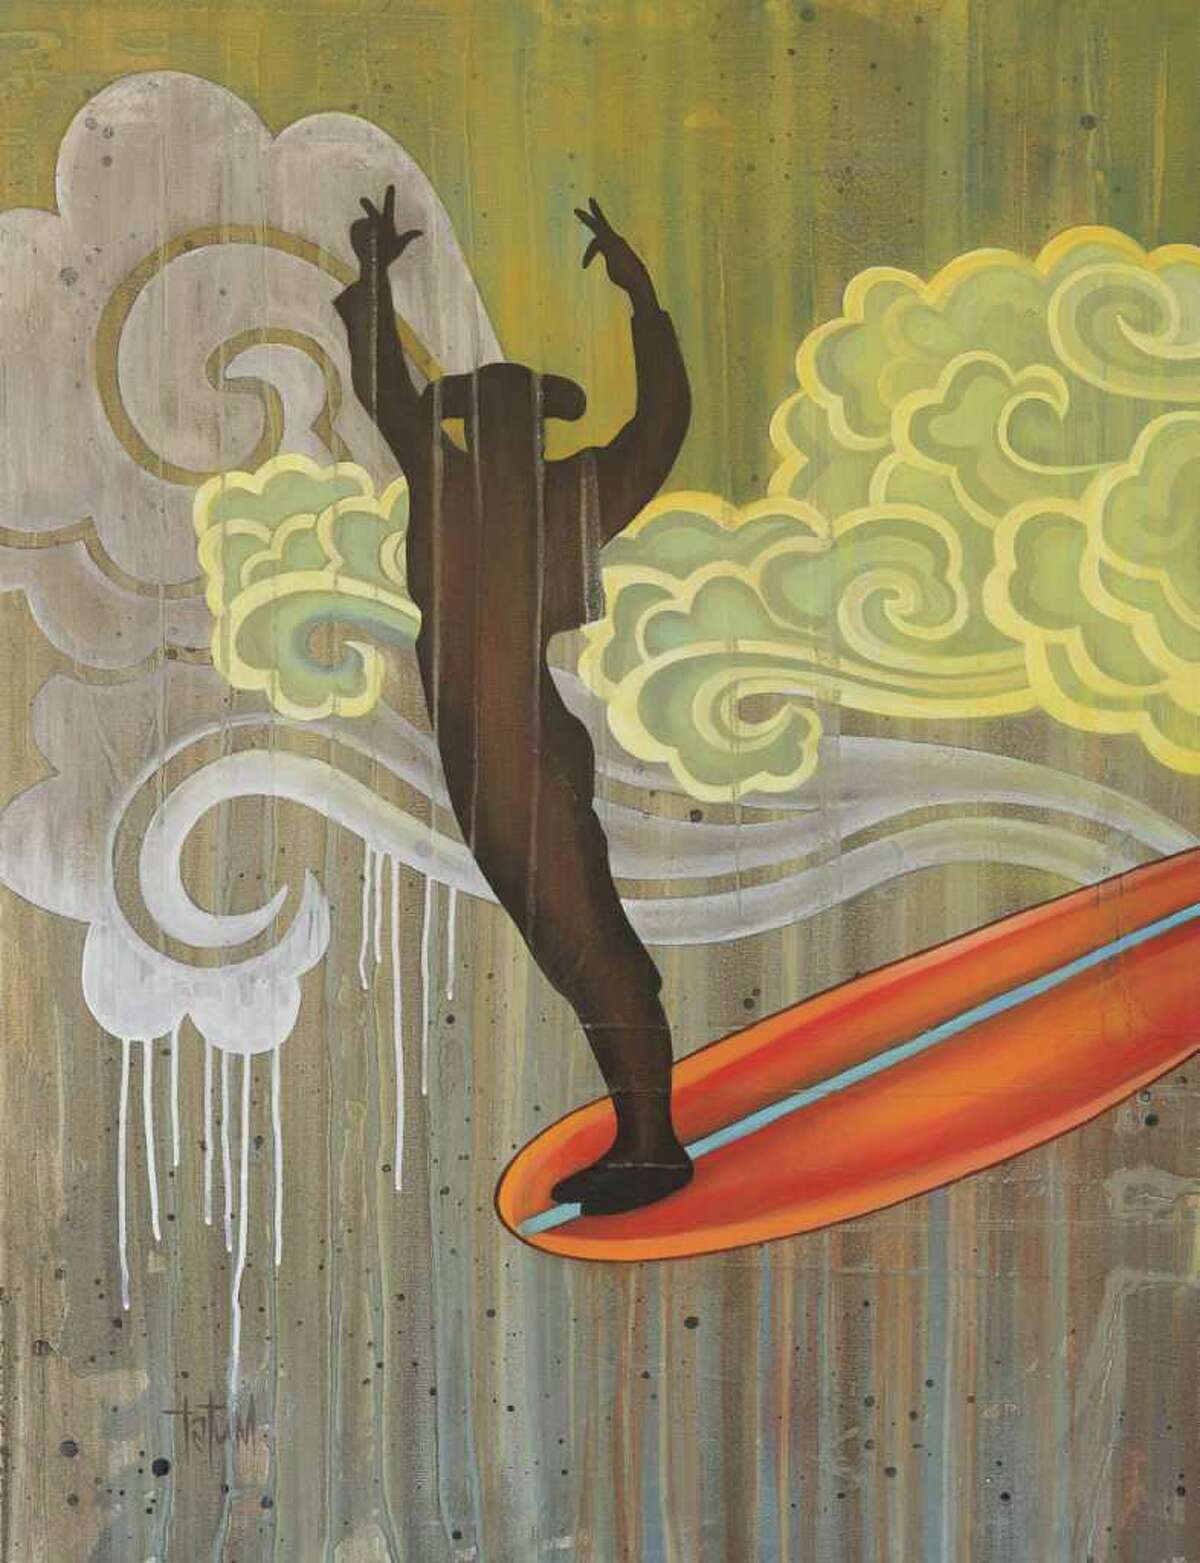 Surfers and matadors — and surfing matadors — are recurring images in the work of San Antonio artist Robert Tatum.